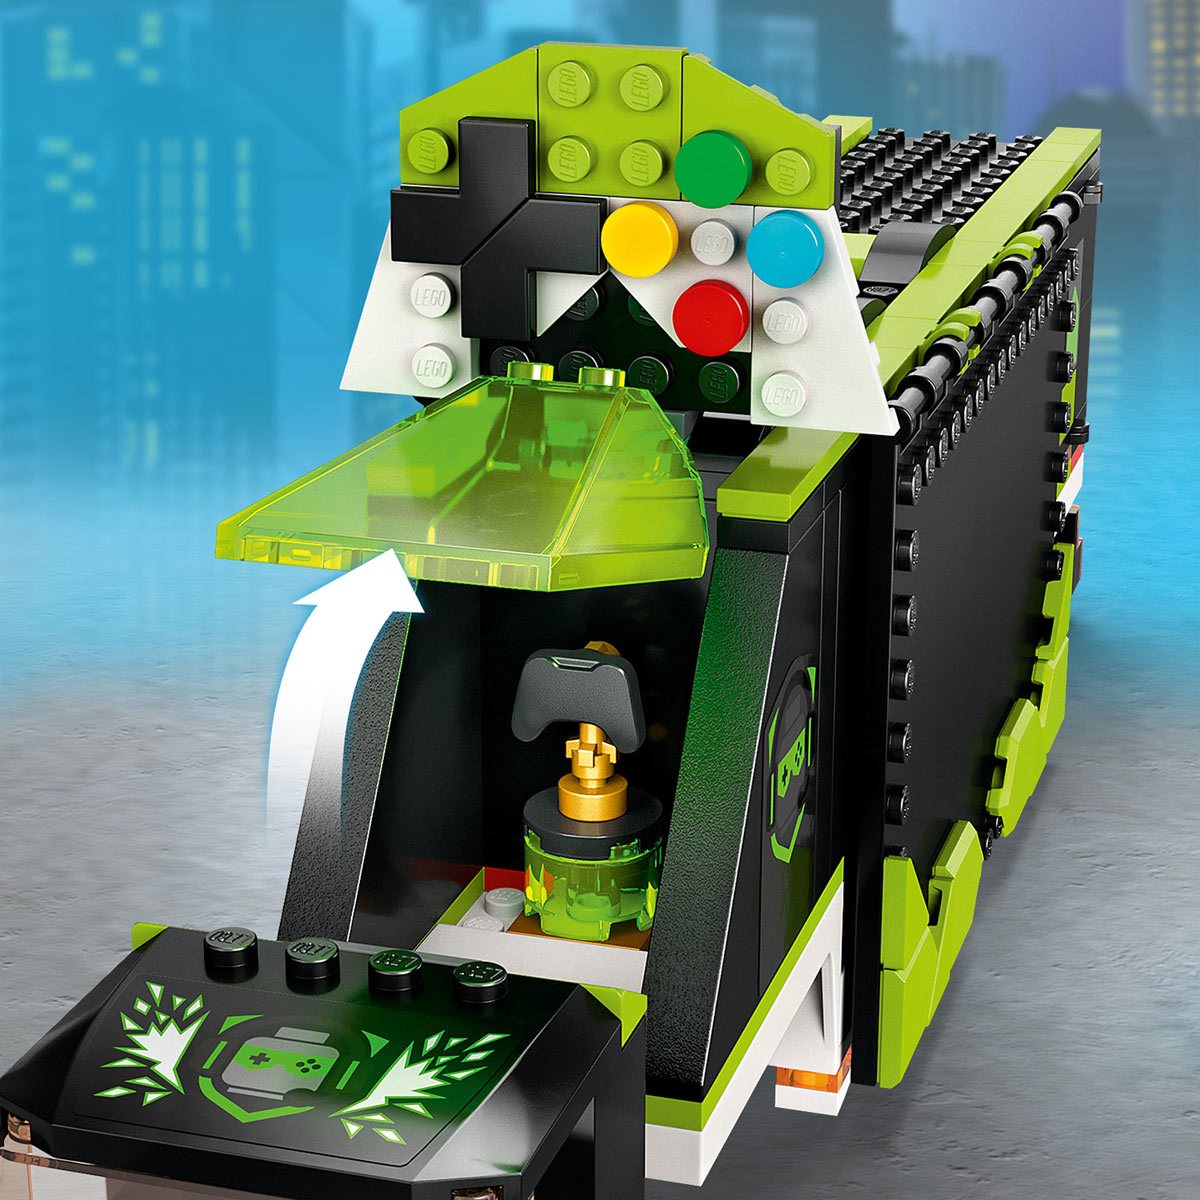 LEGO 60388 City Truck Tournament Earth Gaming - Entertainment